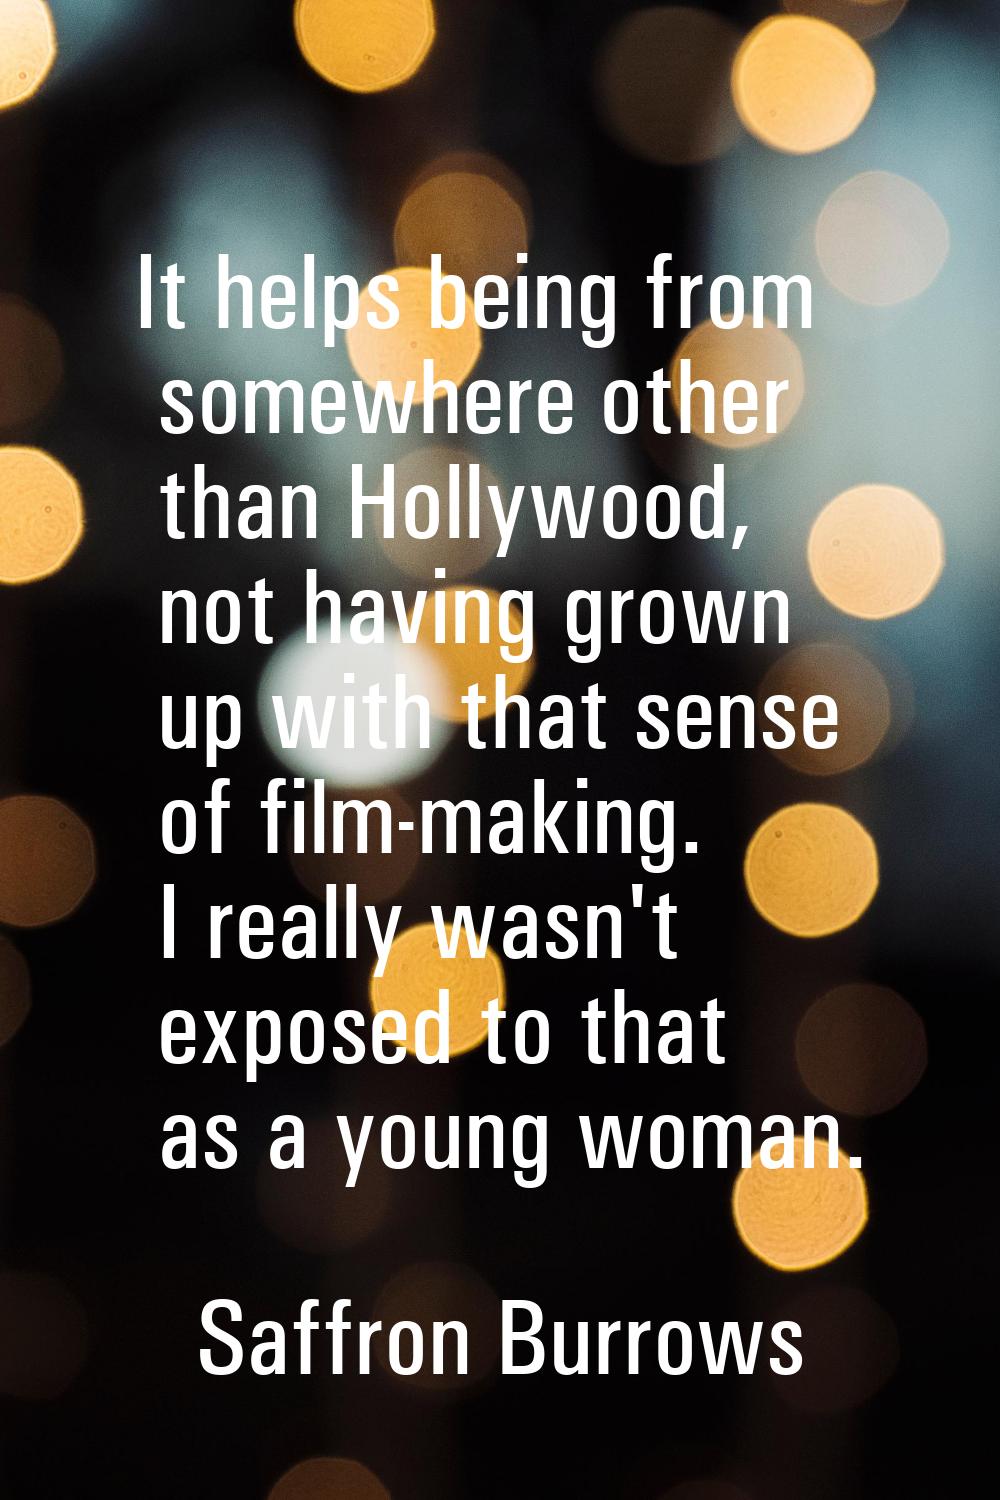 It helps being from somewhere other than Hollywood, not having grown up with that sense of film-mak